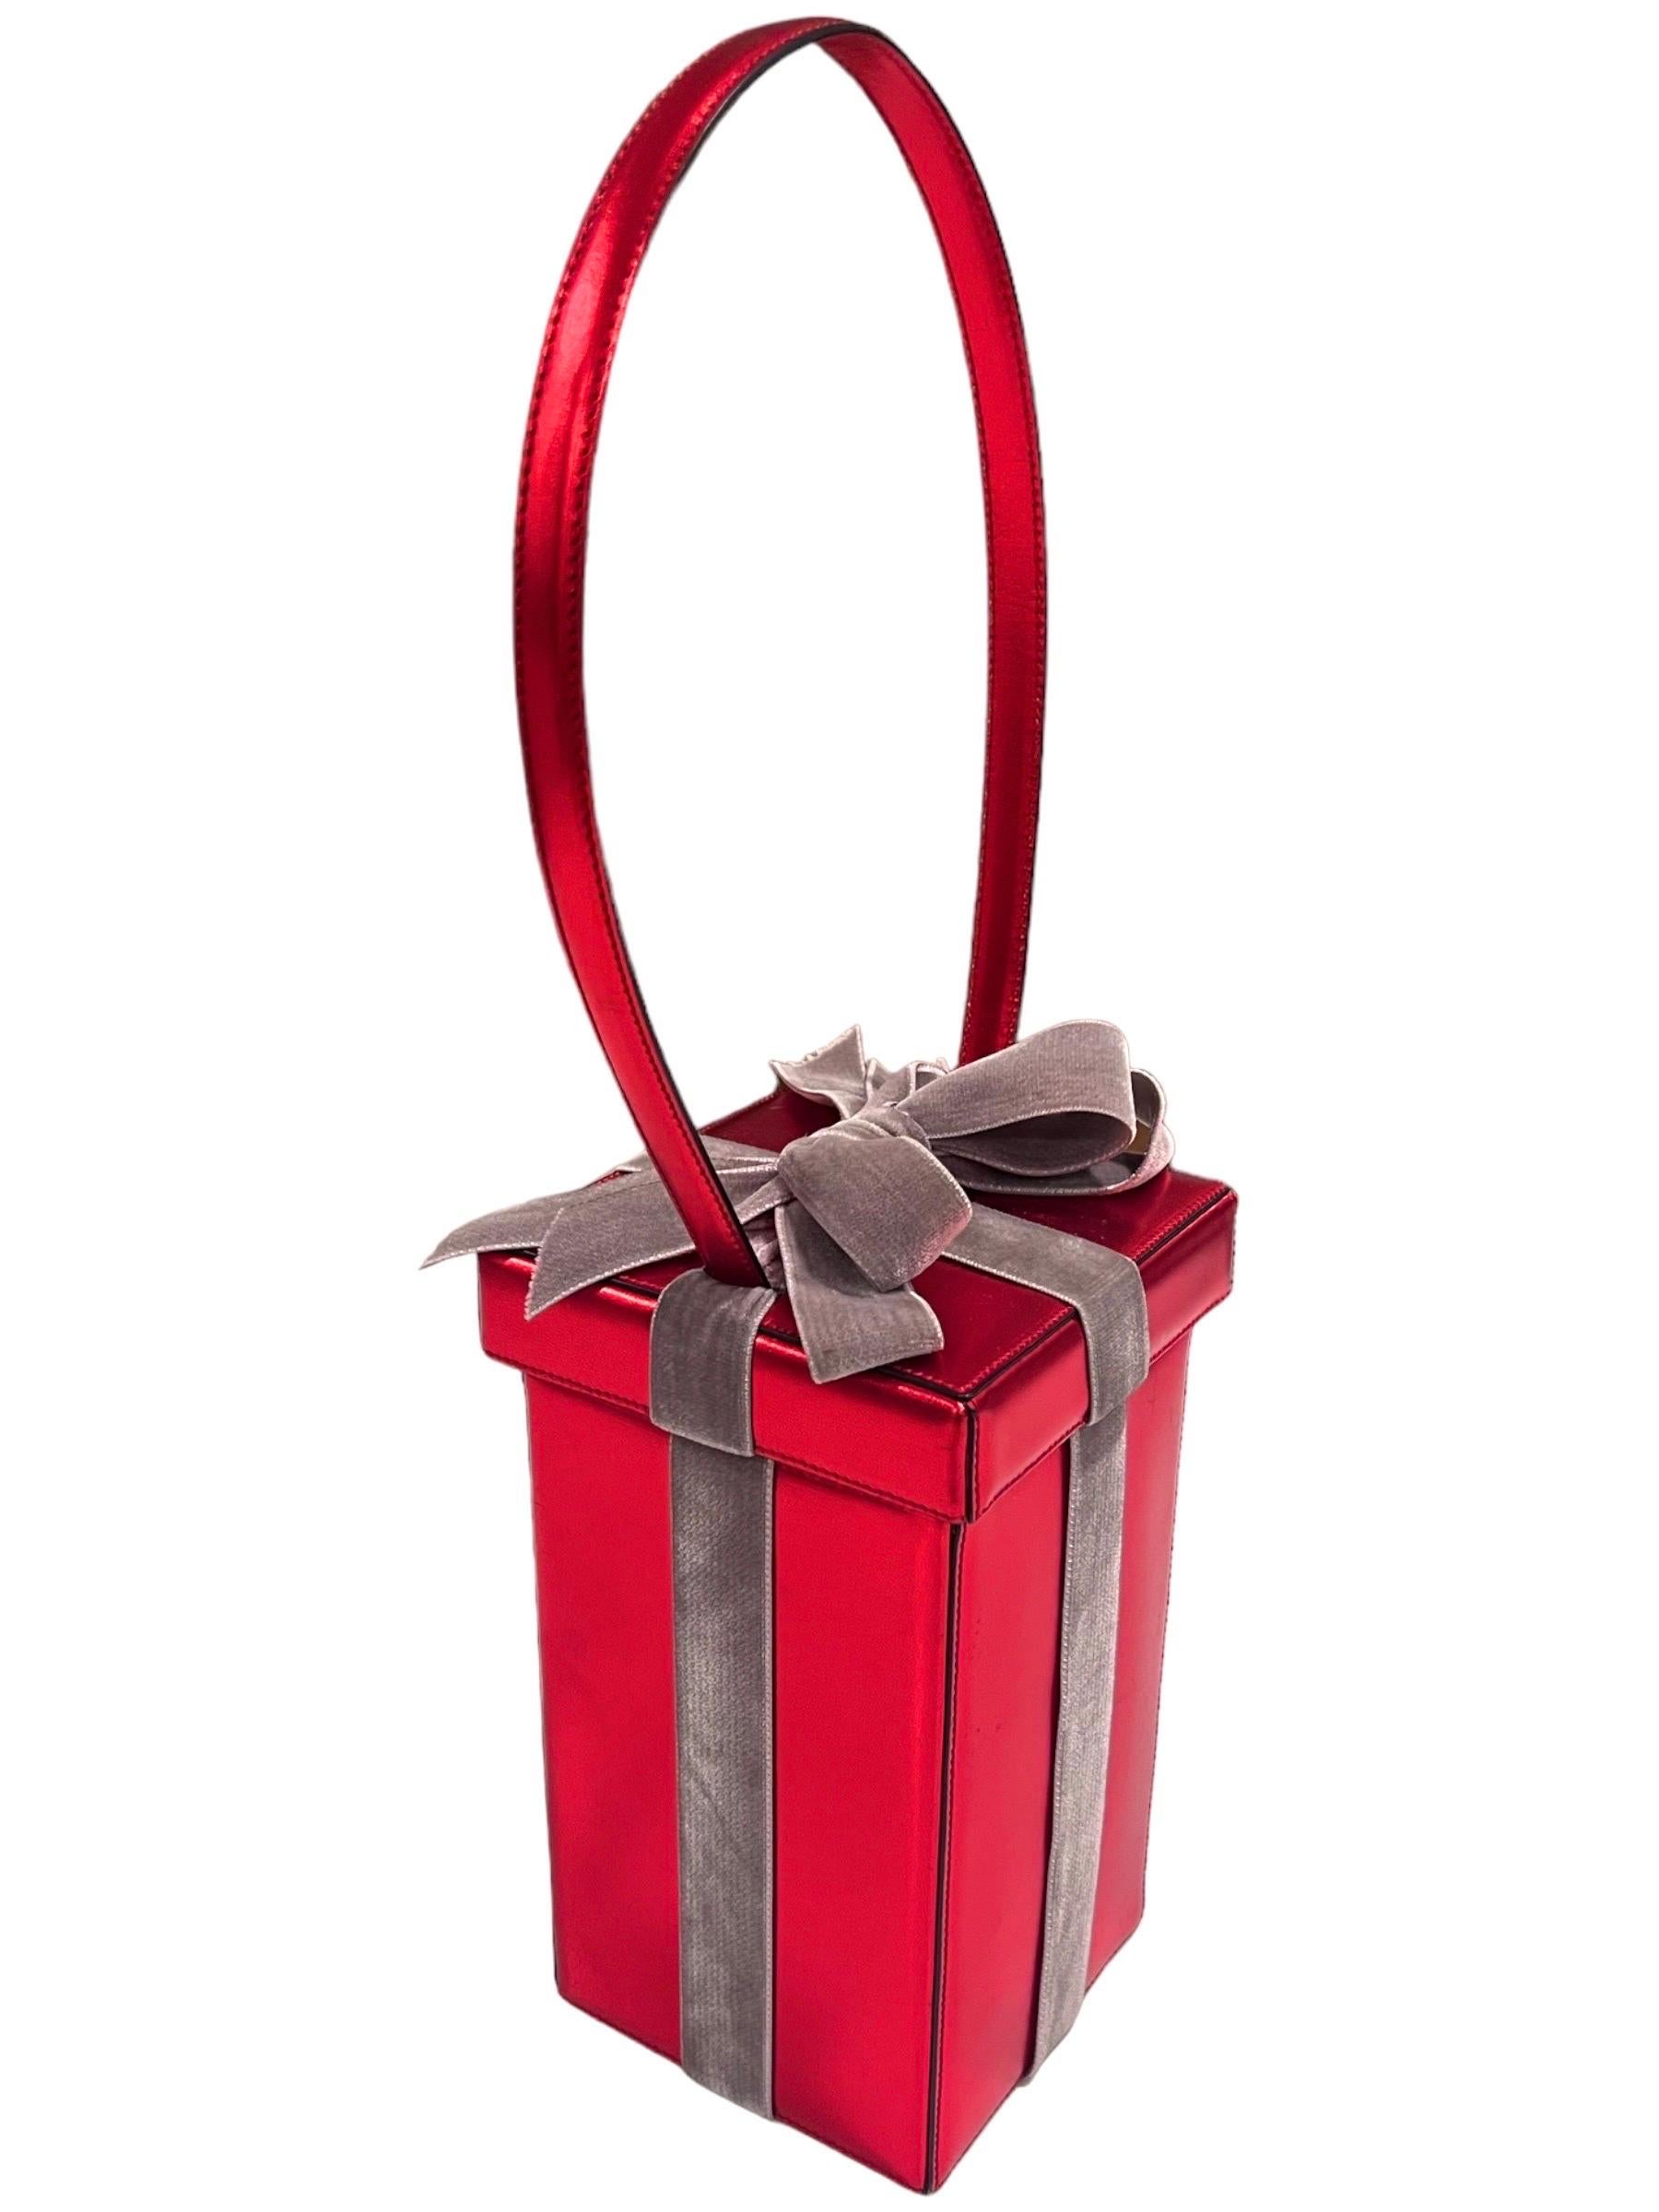 Moschino vintage whimsical red present gift box top handle bag.
Red metallic leather with a velvet bow.
To open the bag, the top lifts up but is attached to the bag by the leather straps.
Unique hanging tag stating “Happy 2000!” and “Present for the